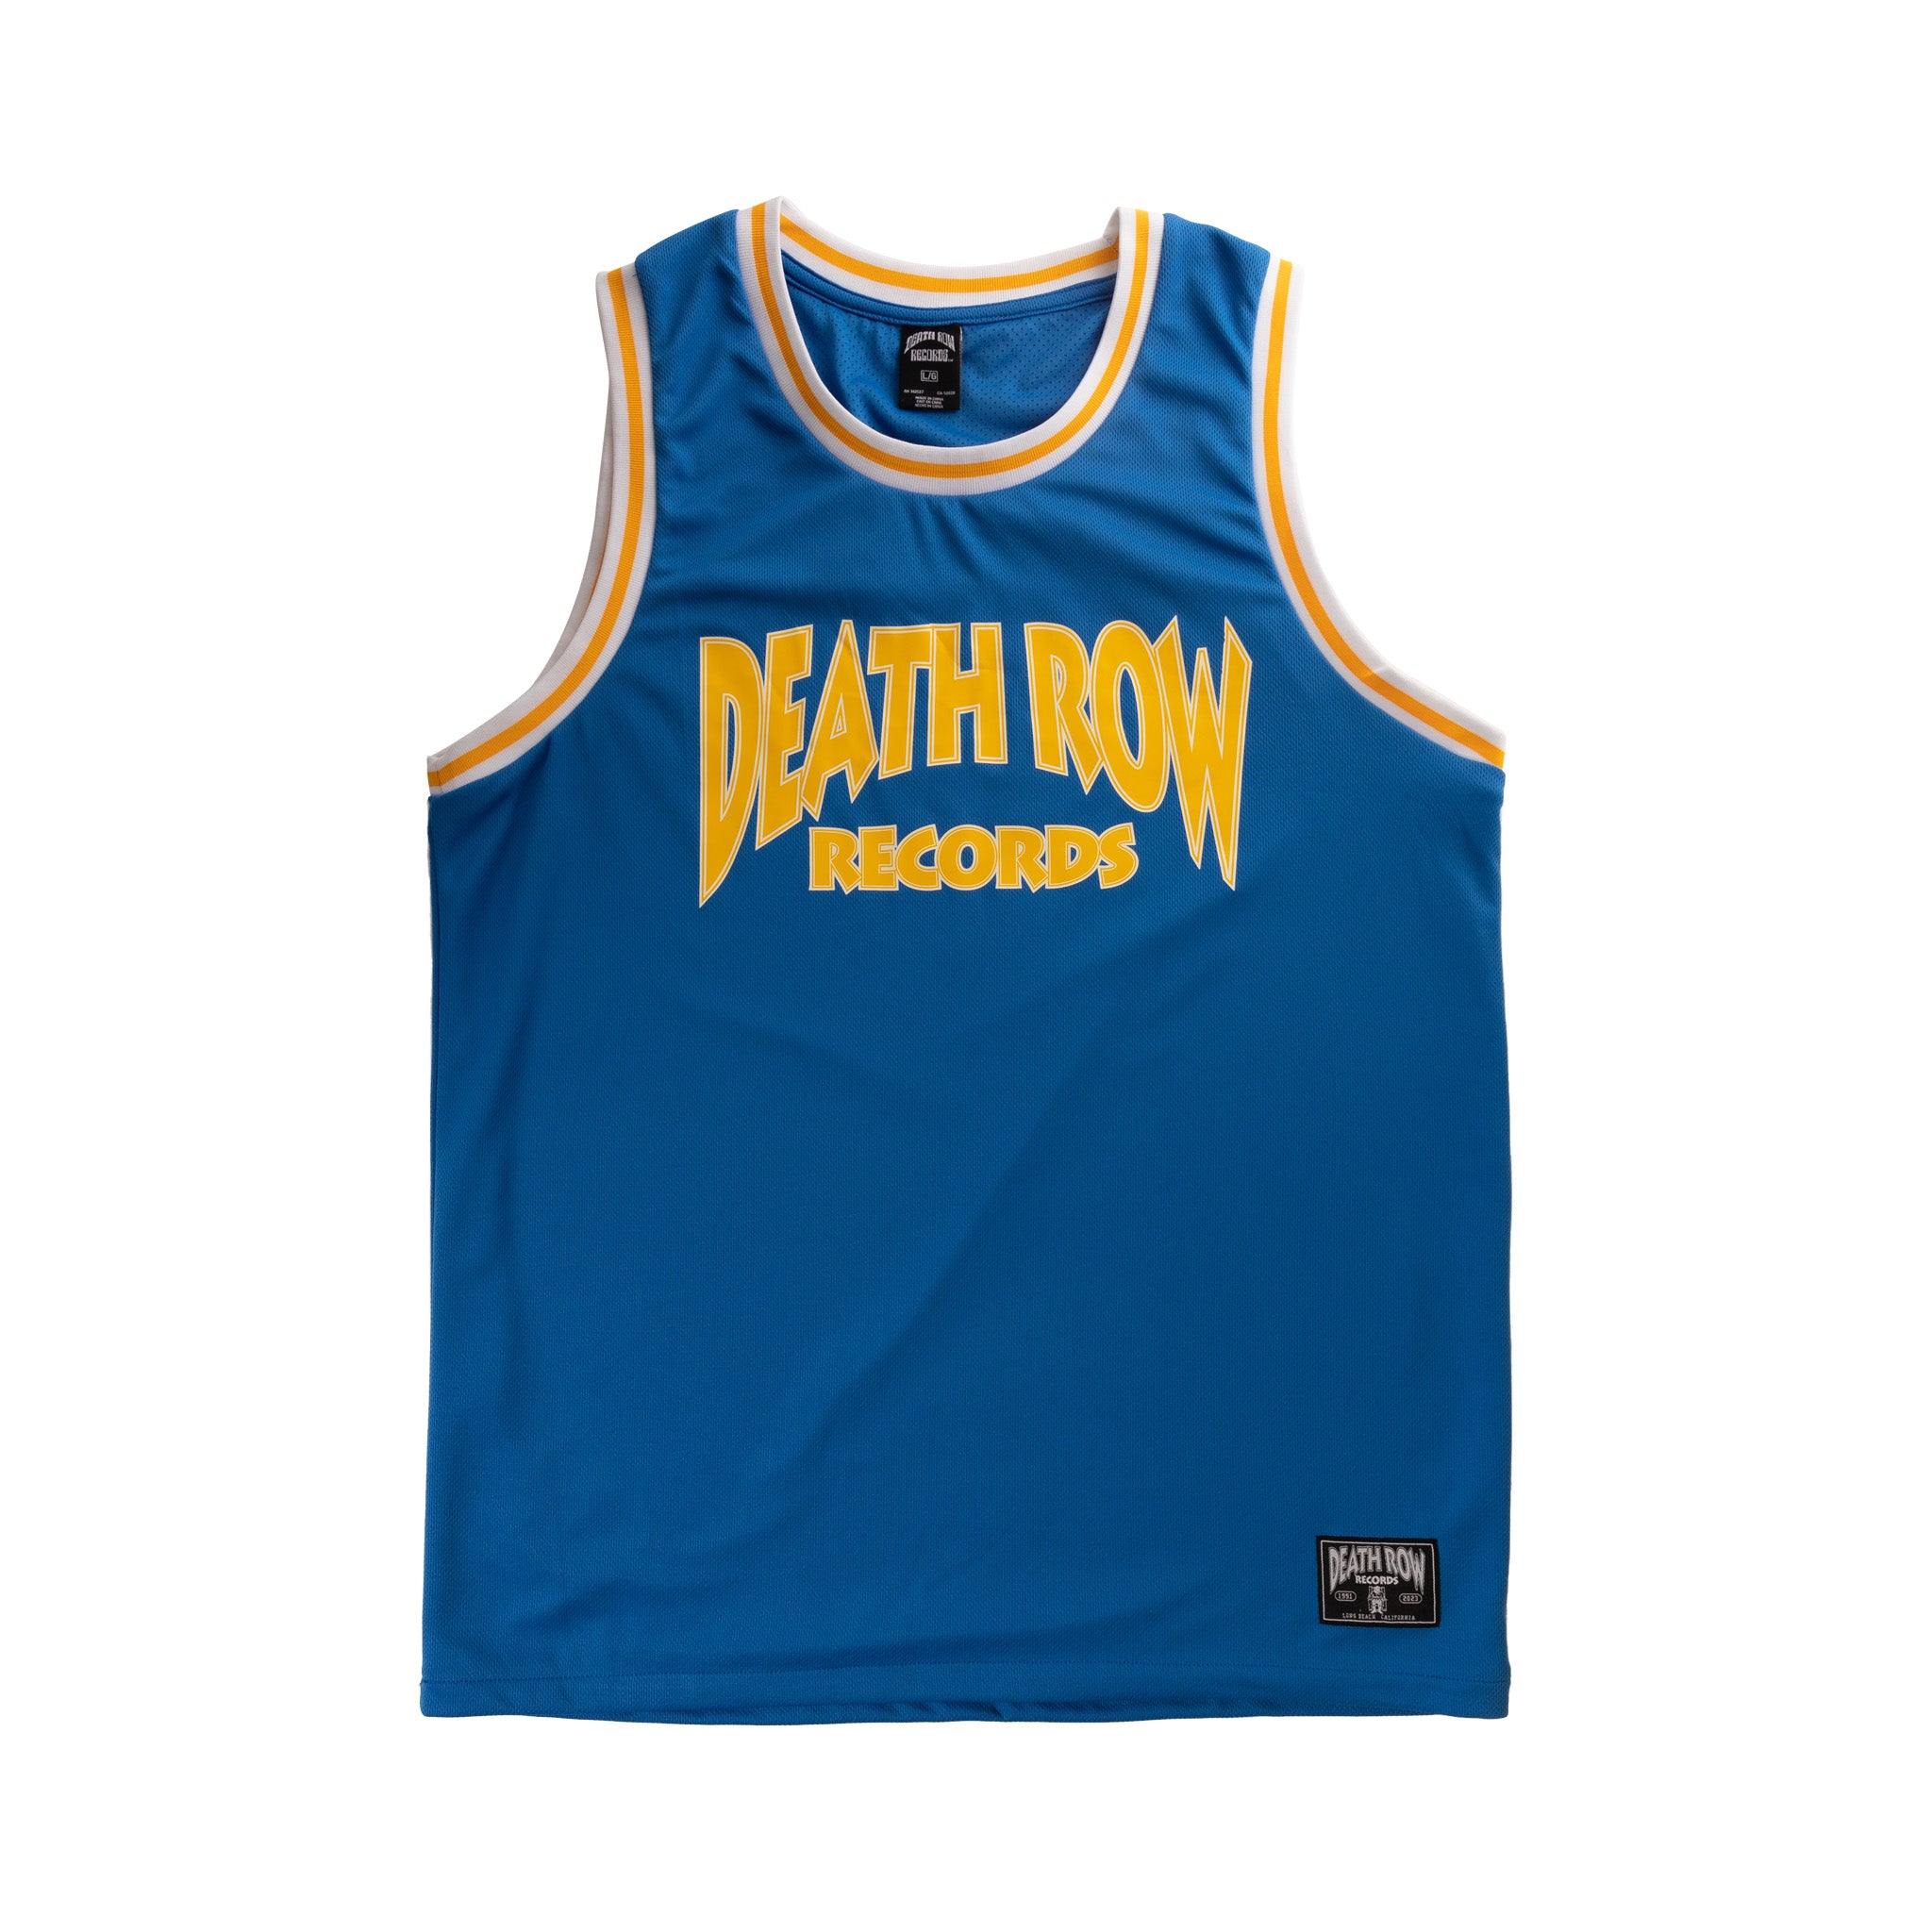 Death Row Records Red Basketball Jersey